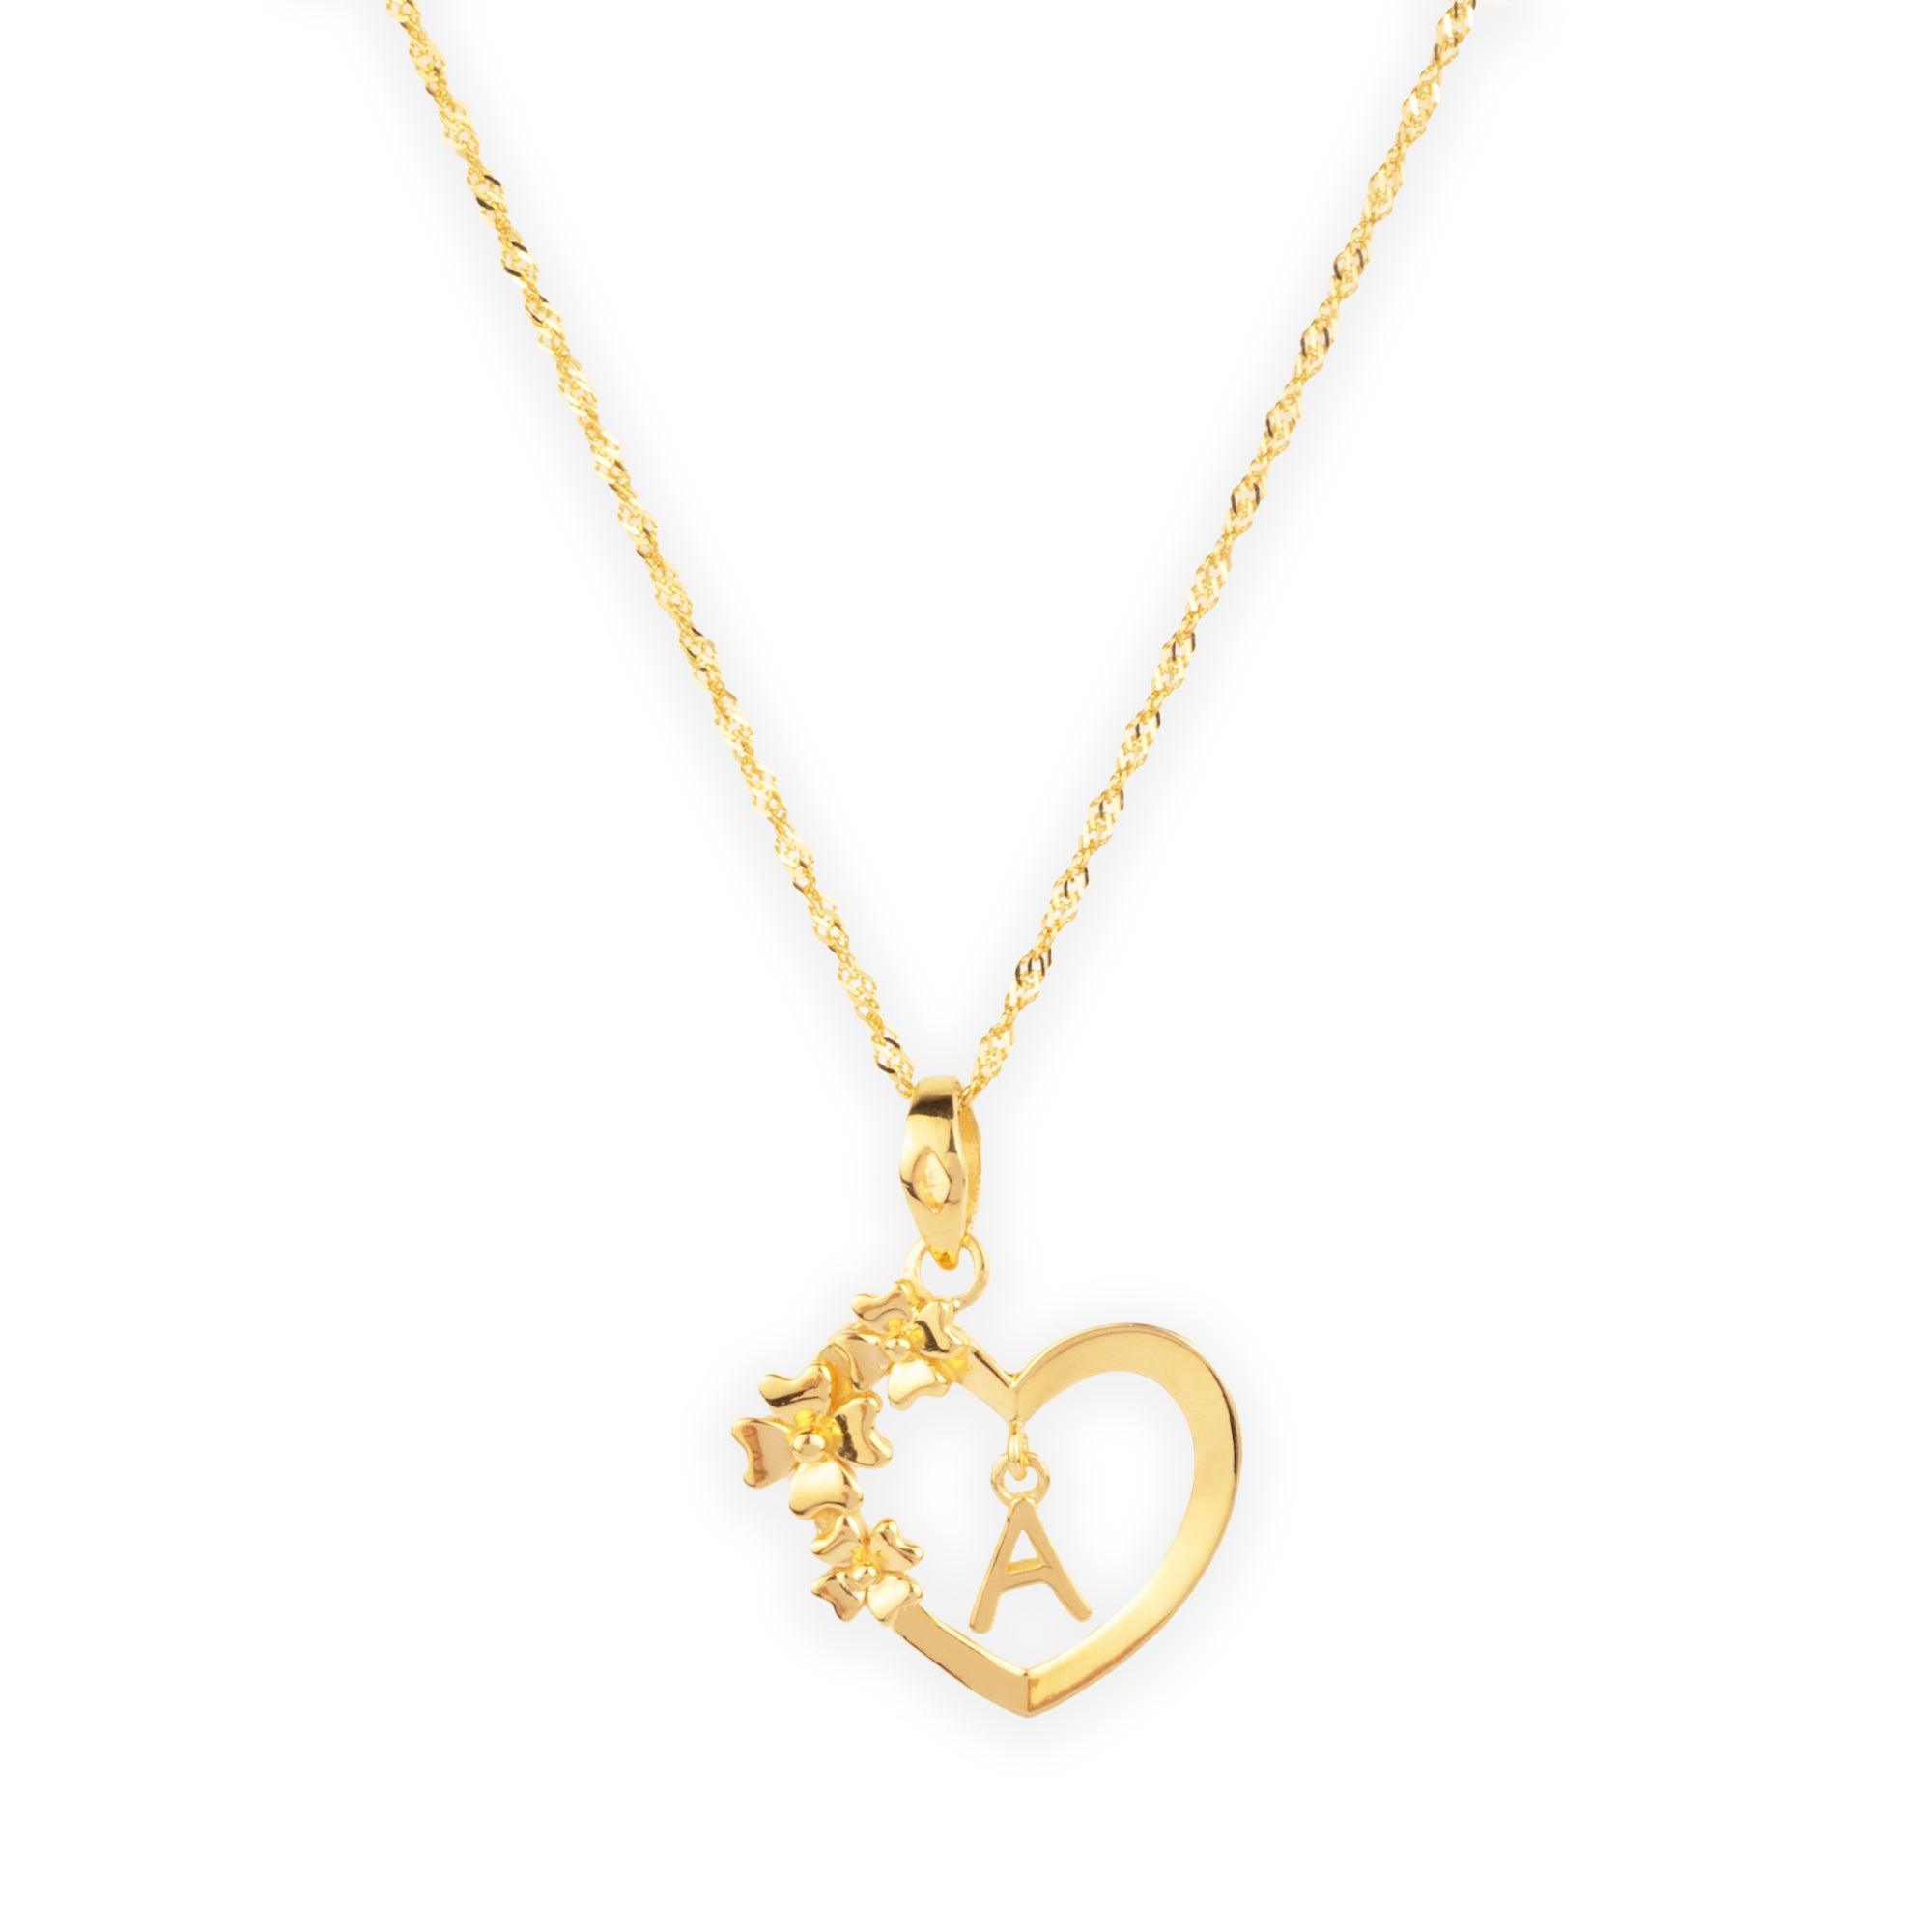 'A' 22ct Gold Heart Shape Initial with Flower Design Pendant P-7035